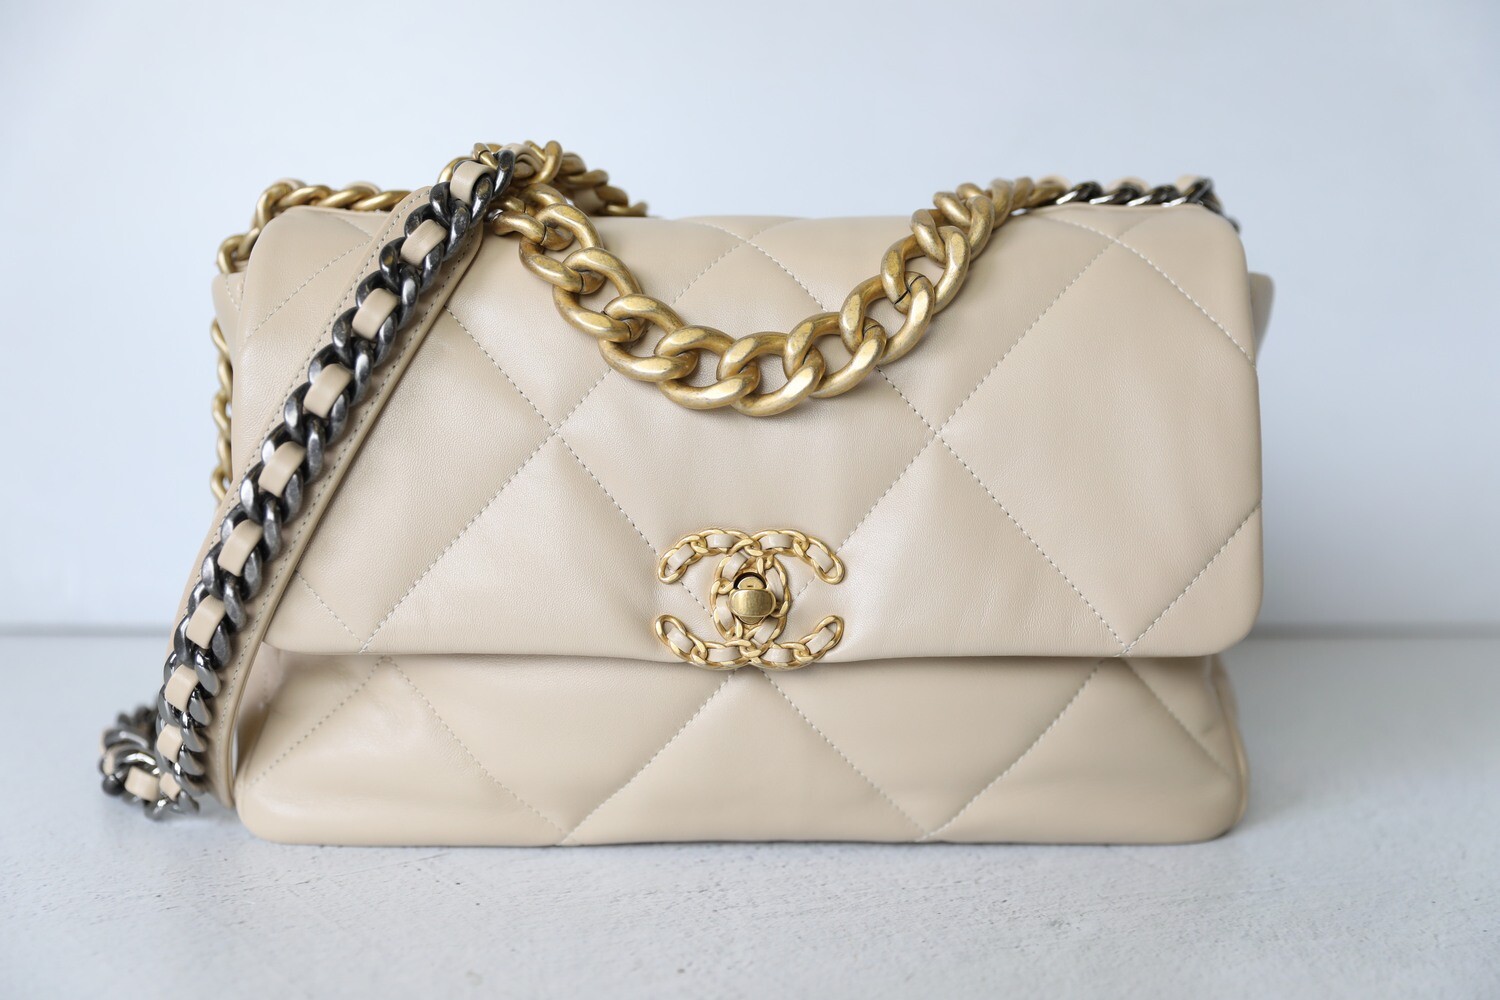 Chanel 19 Dark Beige Large (Jumbo) Middle Size, Preowned in Dustbag - Julia  Rose Boston